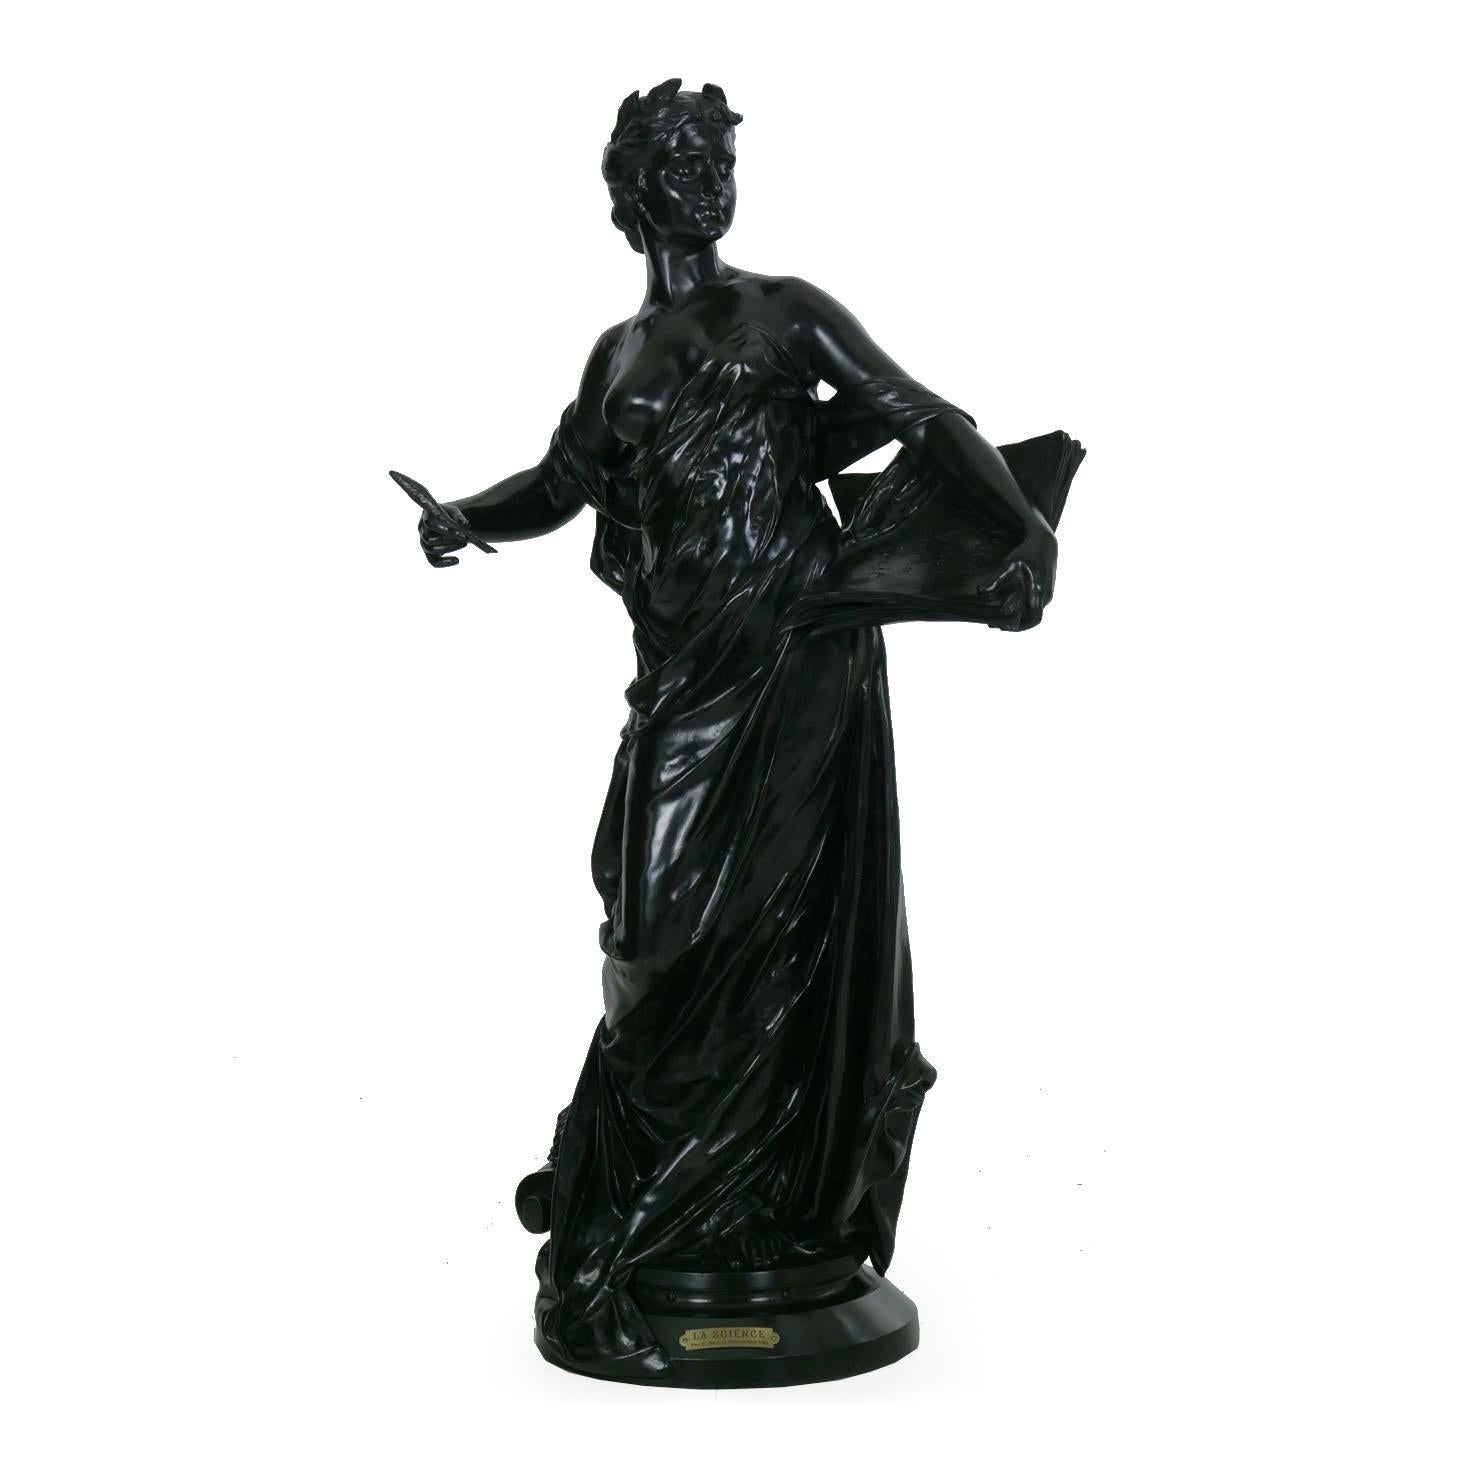  Large French Bronze Sculpture of “La Science” by Edouard Drouot